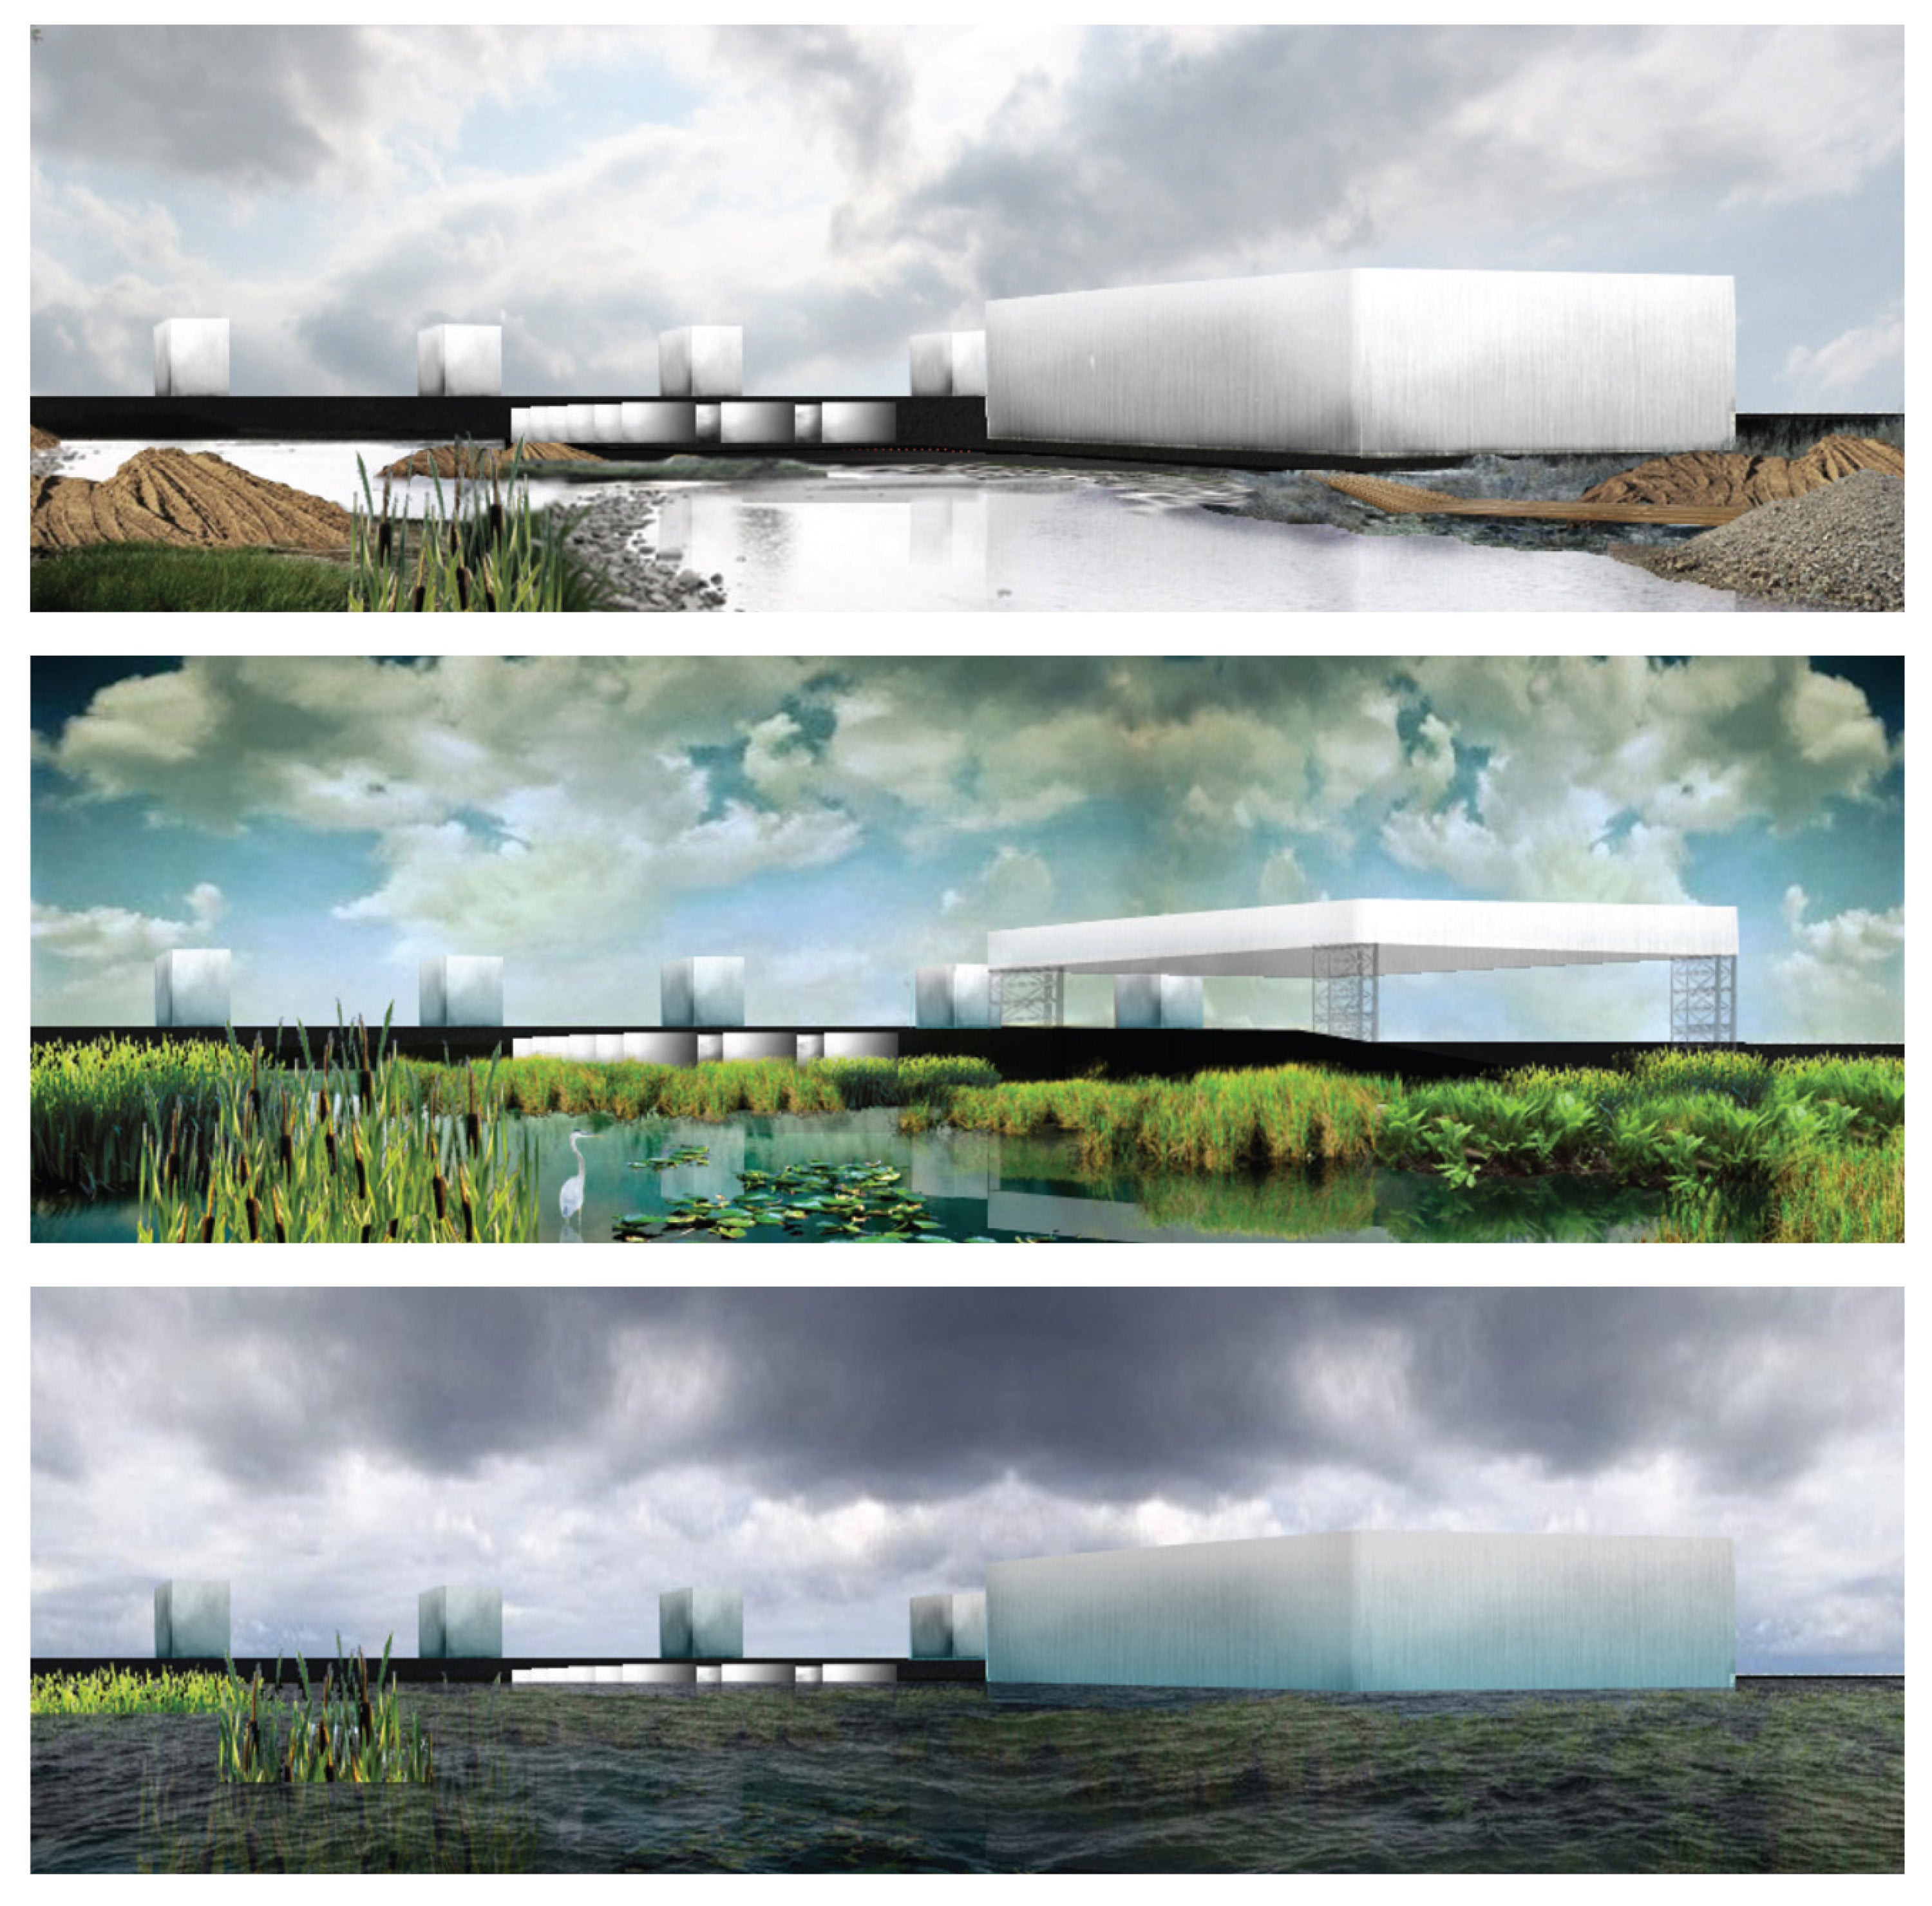 Three rendered elevations of a building/site design. They each differ on the water level presented in the renderings.